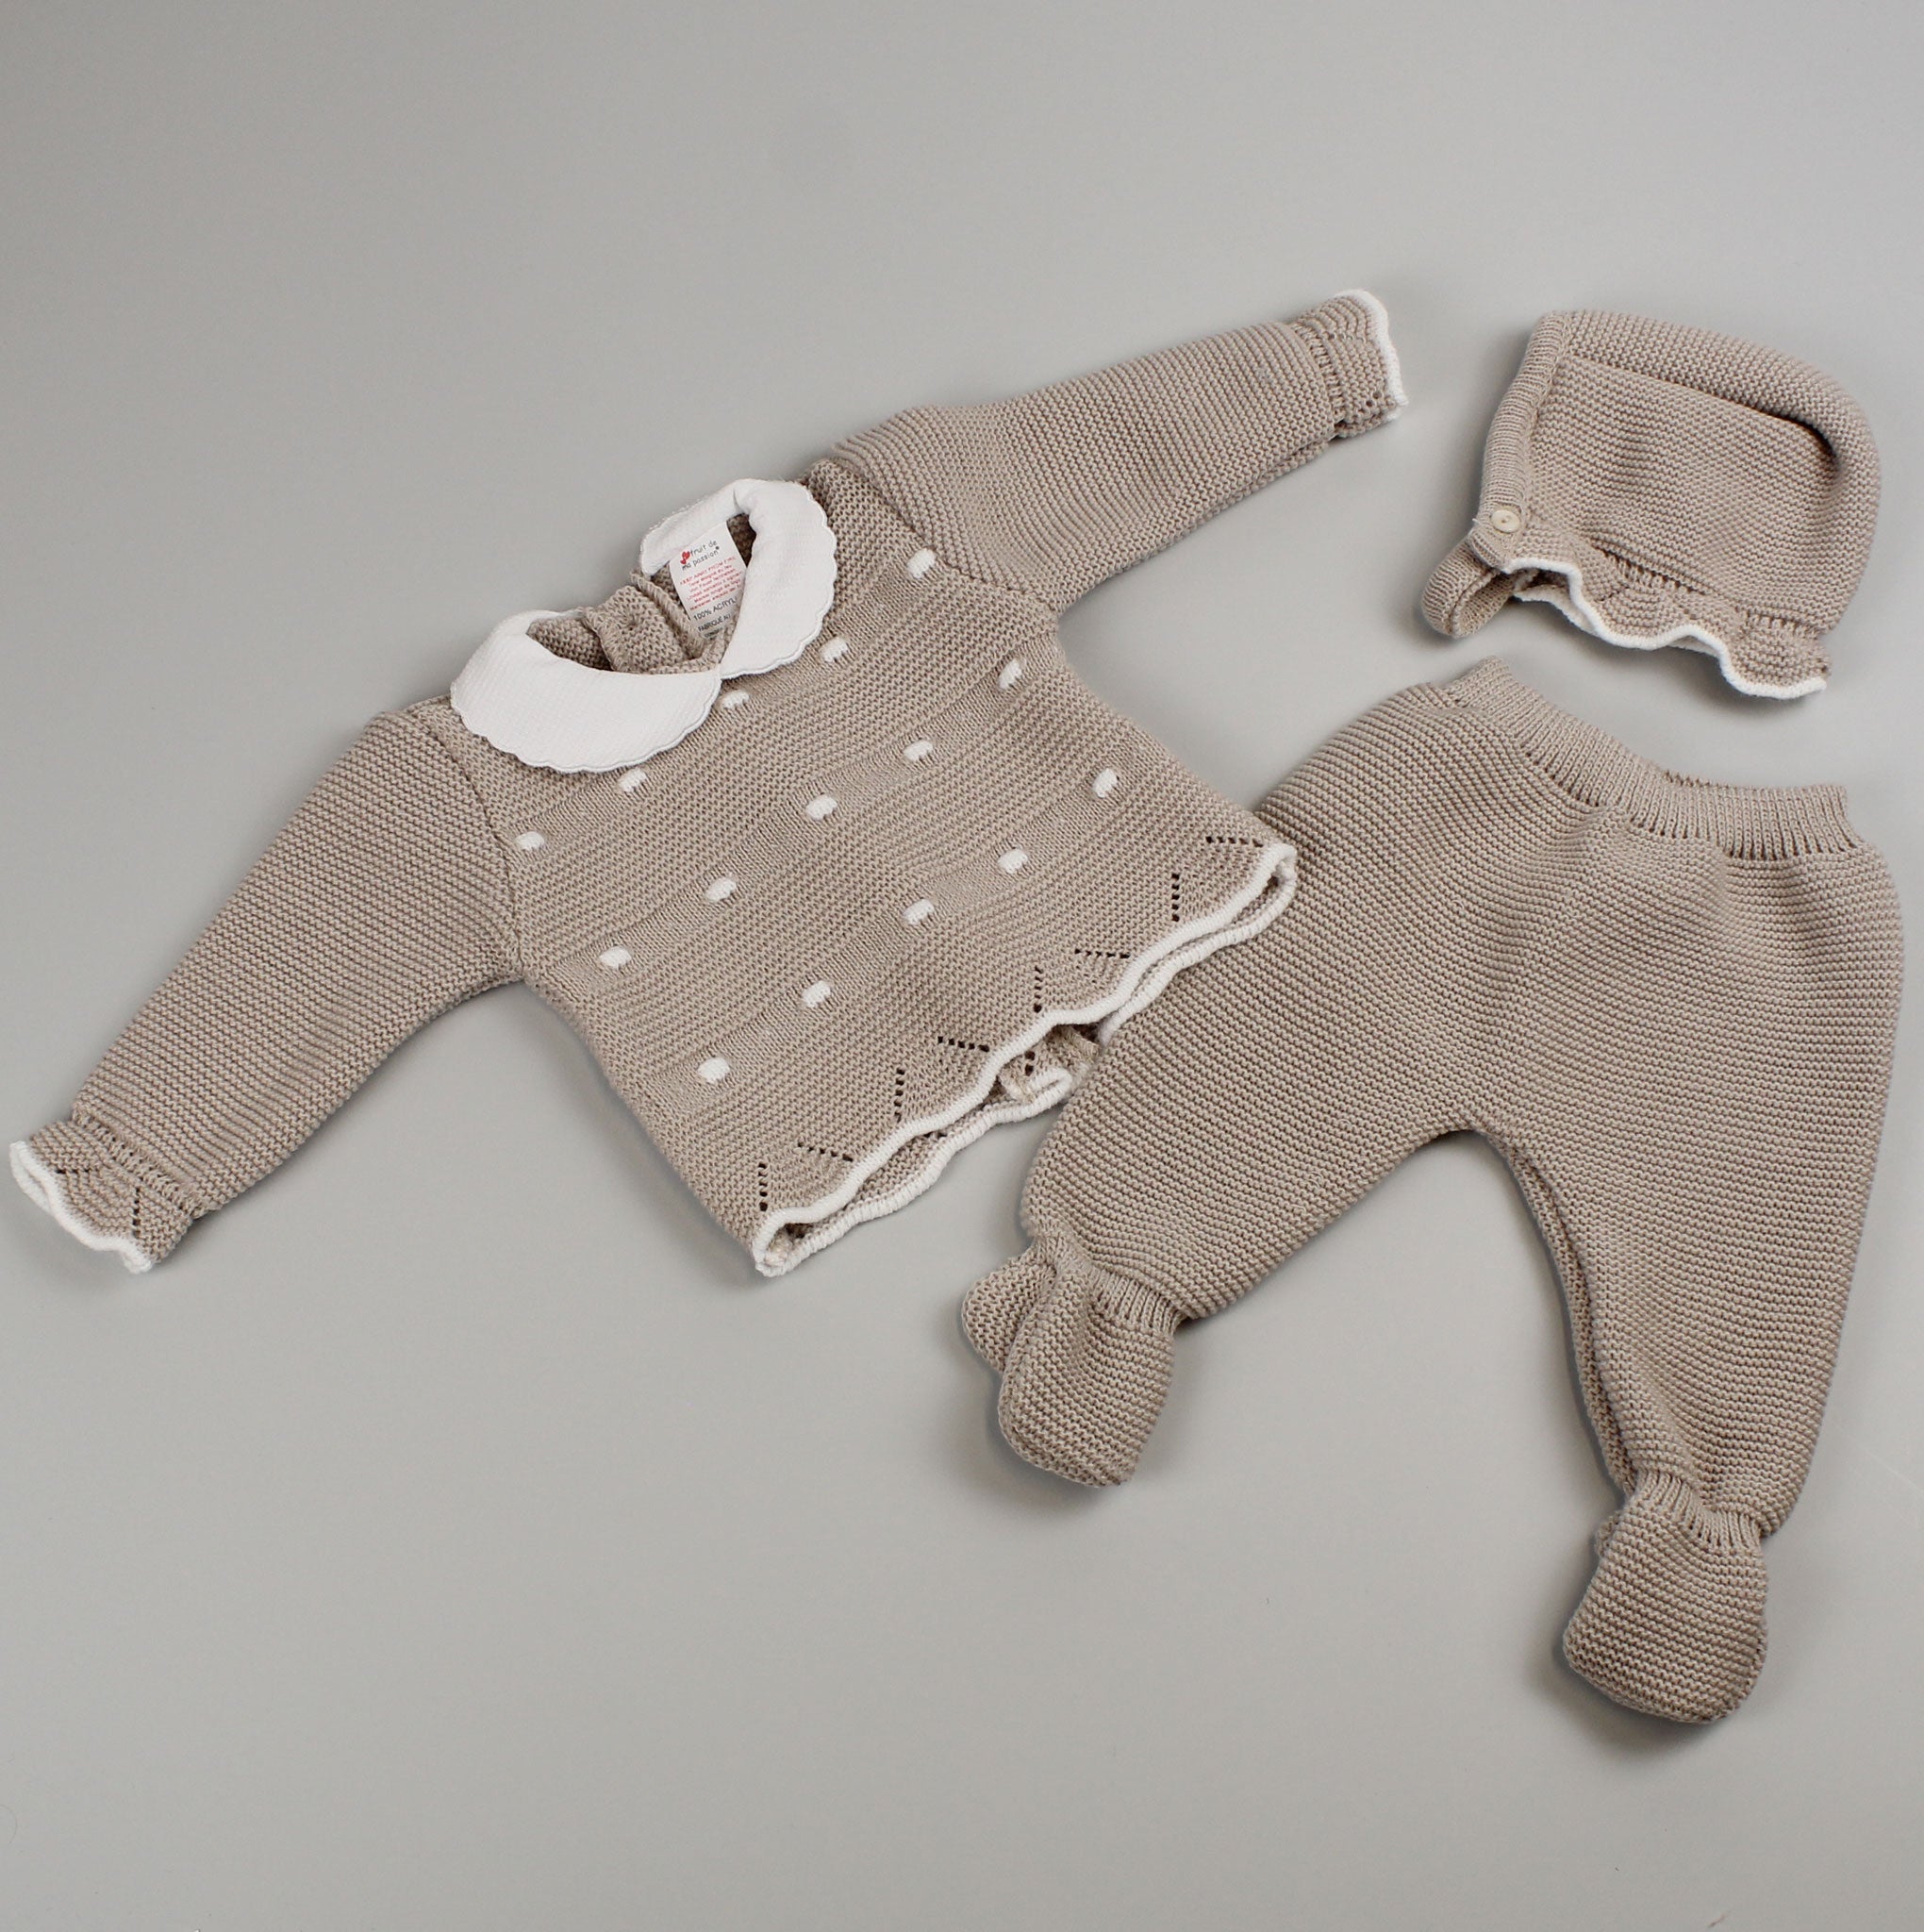 Baby Girls Beige Knitted Outfit - Top, Bottoms and Bonnet